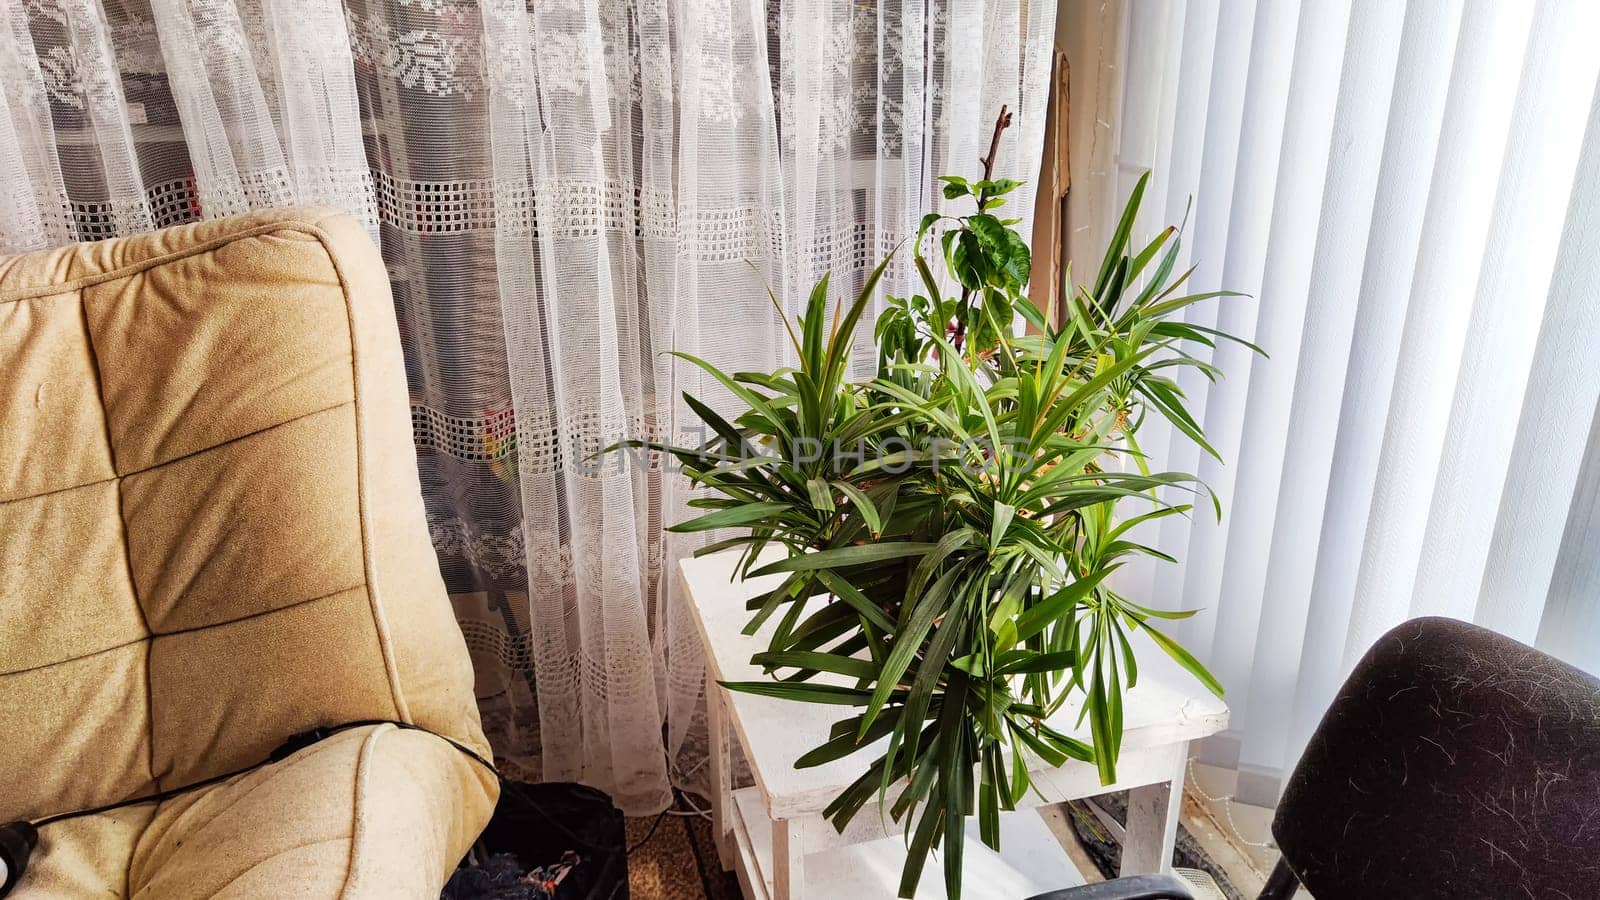 Part of the interior, green indoor plants by the window with a translucent white curtains. A bright cozy corner by the window with plants. Winter garden in the room or home by keleny